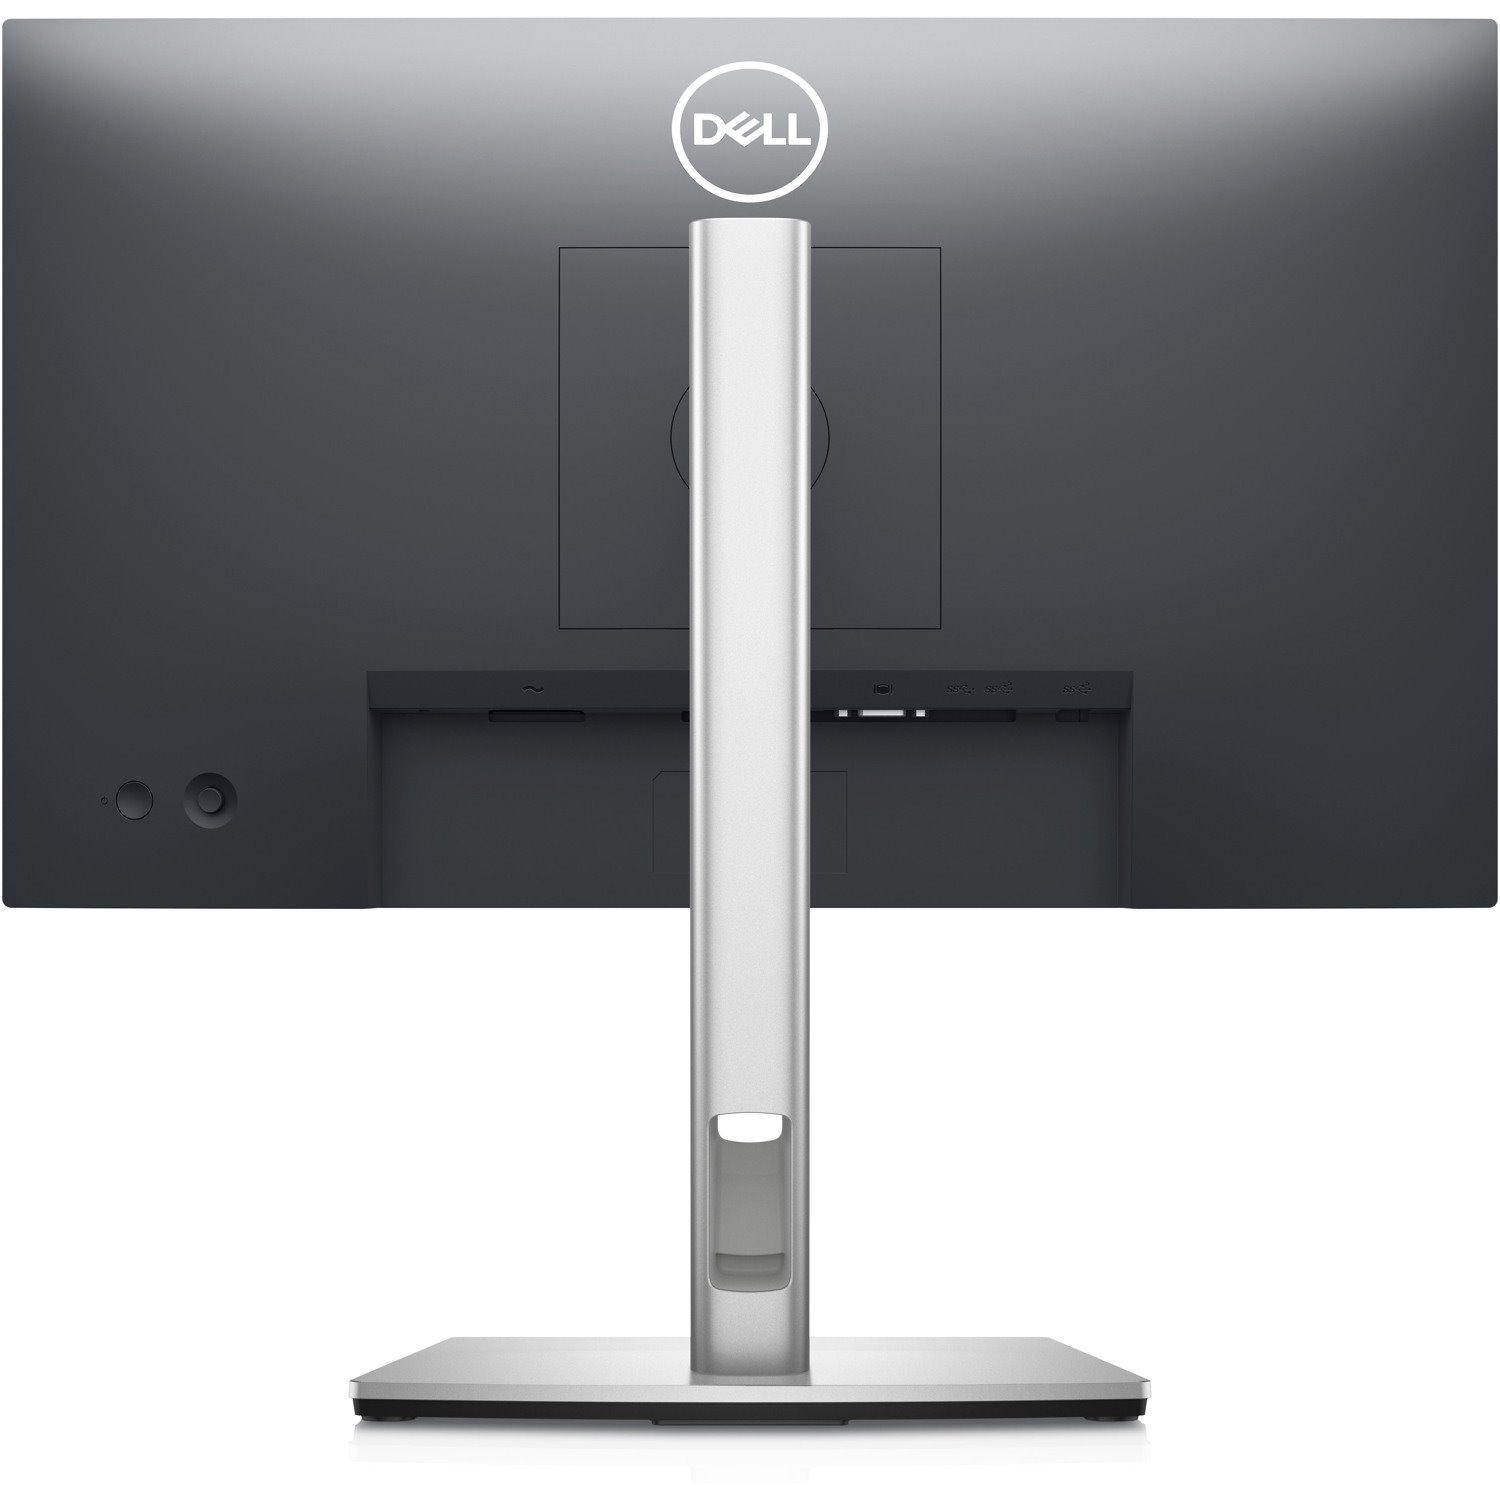 Dell P2222H 21.5" Full HD WLED LCD Monitor - 16:9 - Black, Silver